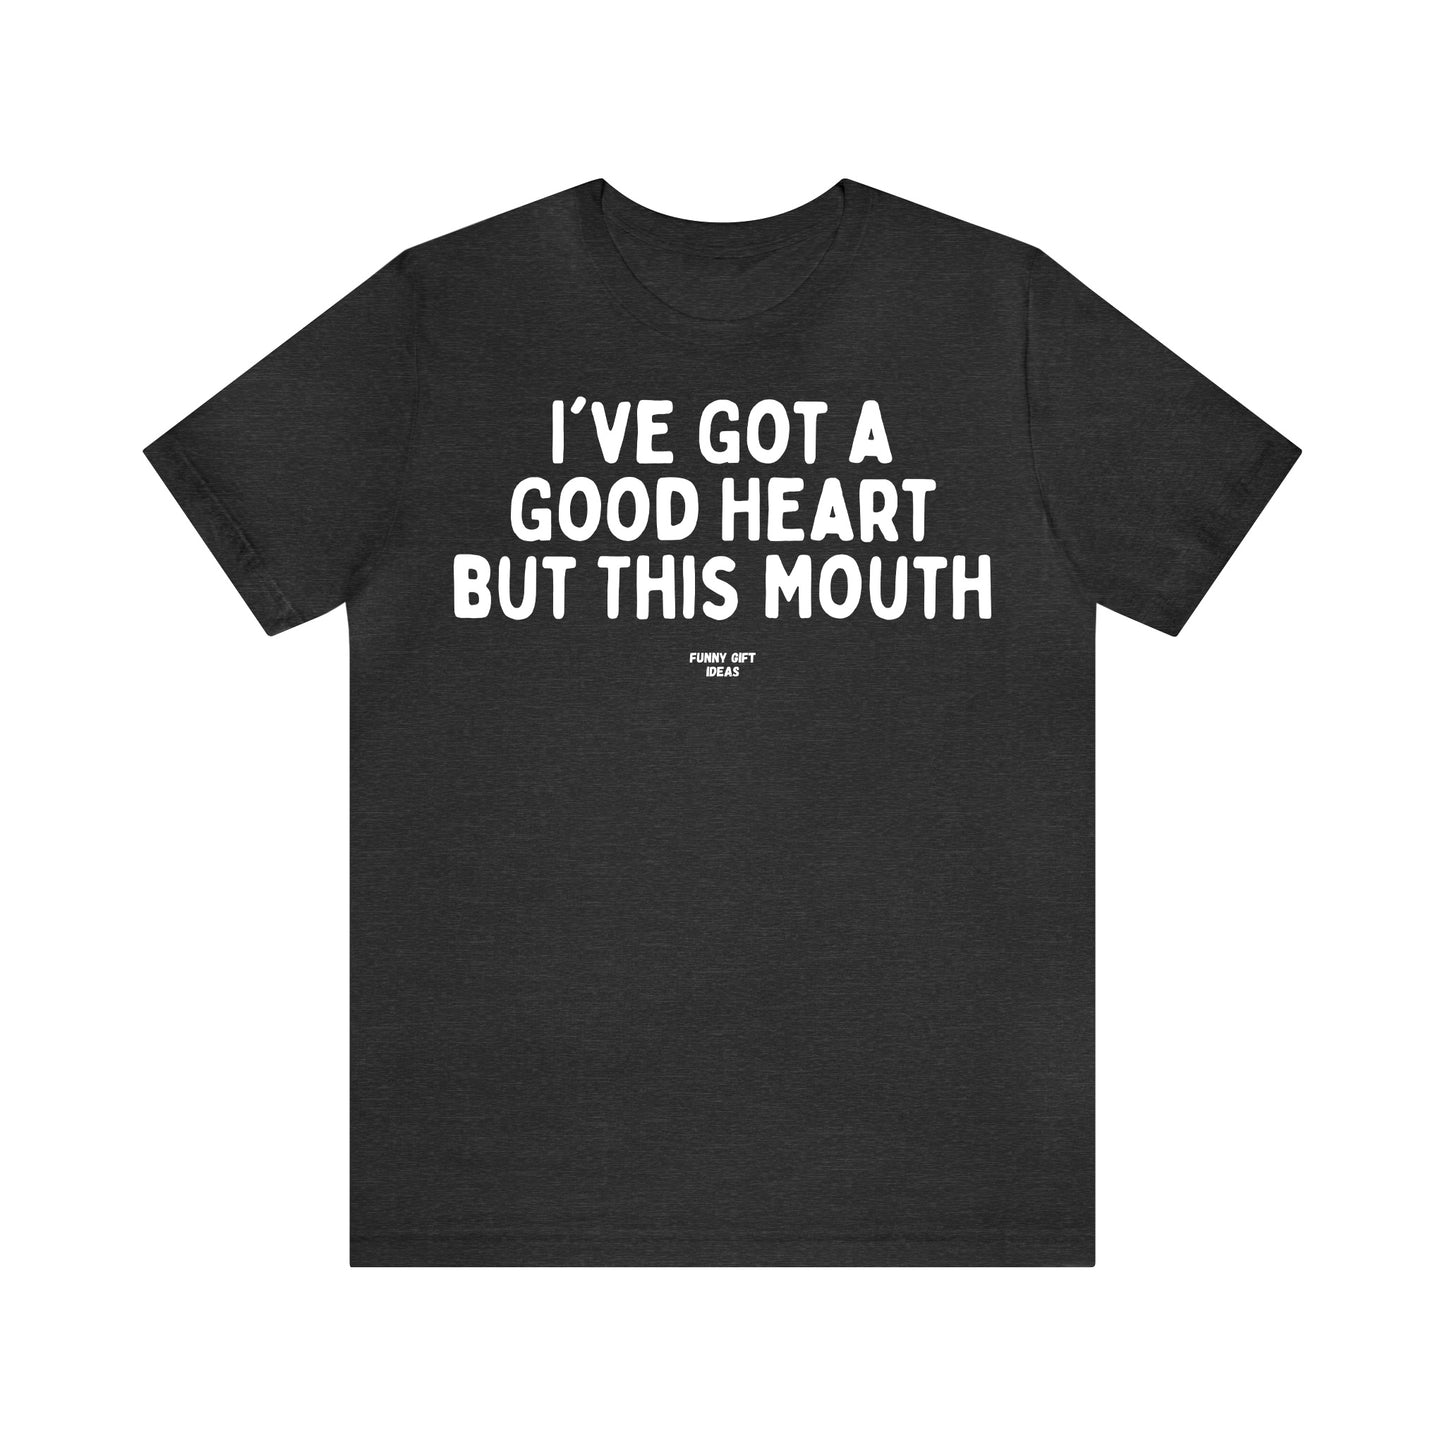 Funny Shirts for Women - I've Got a Good Heart but This Mouth - Women's T Shirts